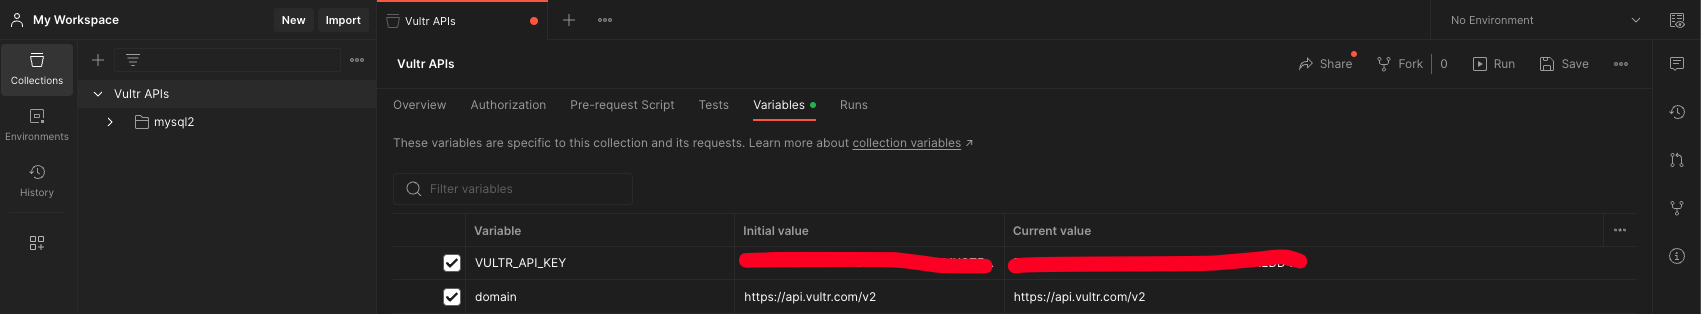 Add env variables for collection